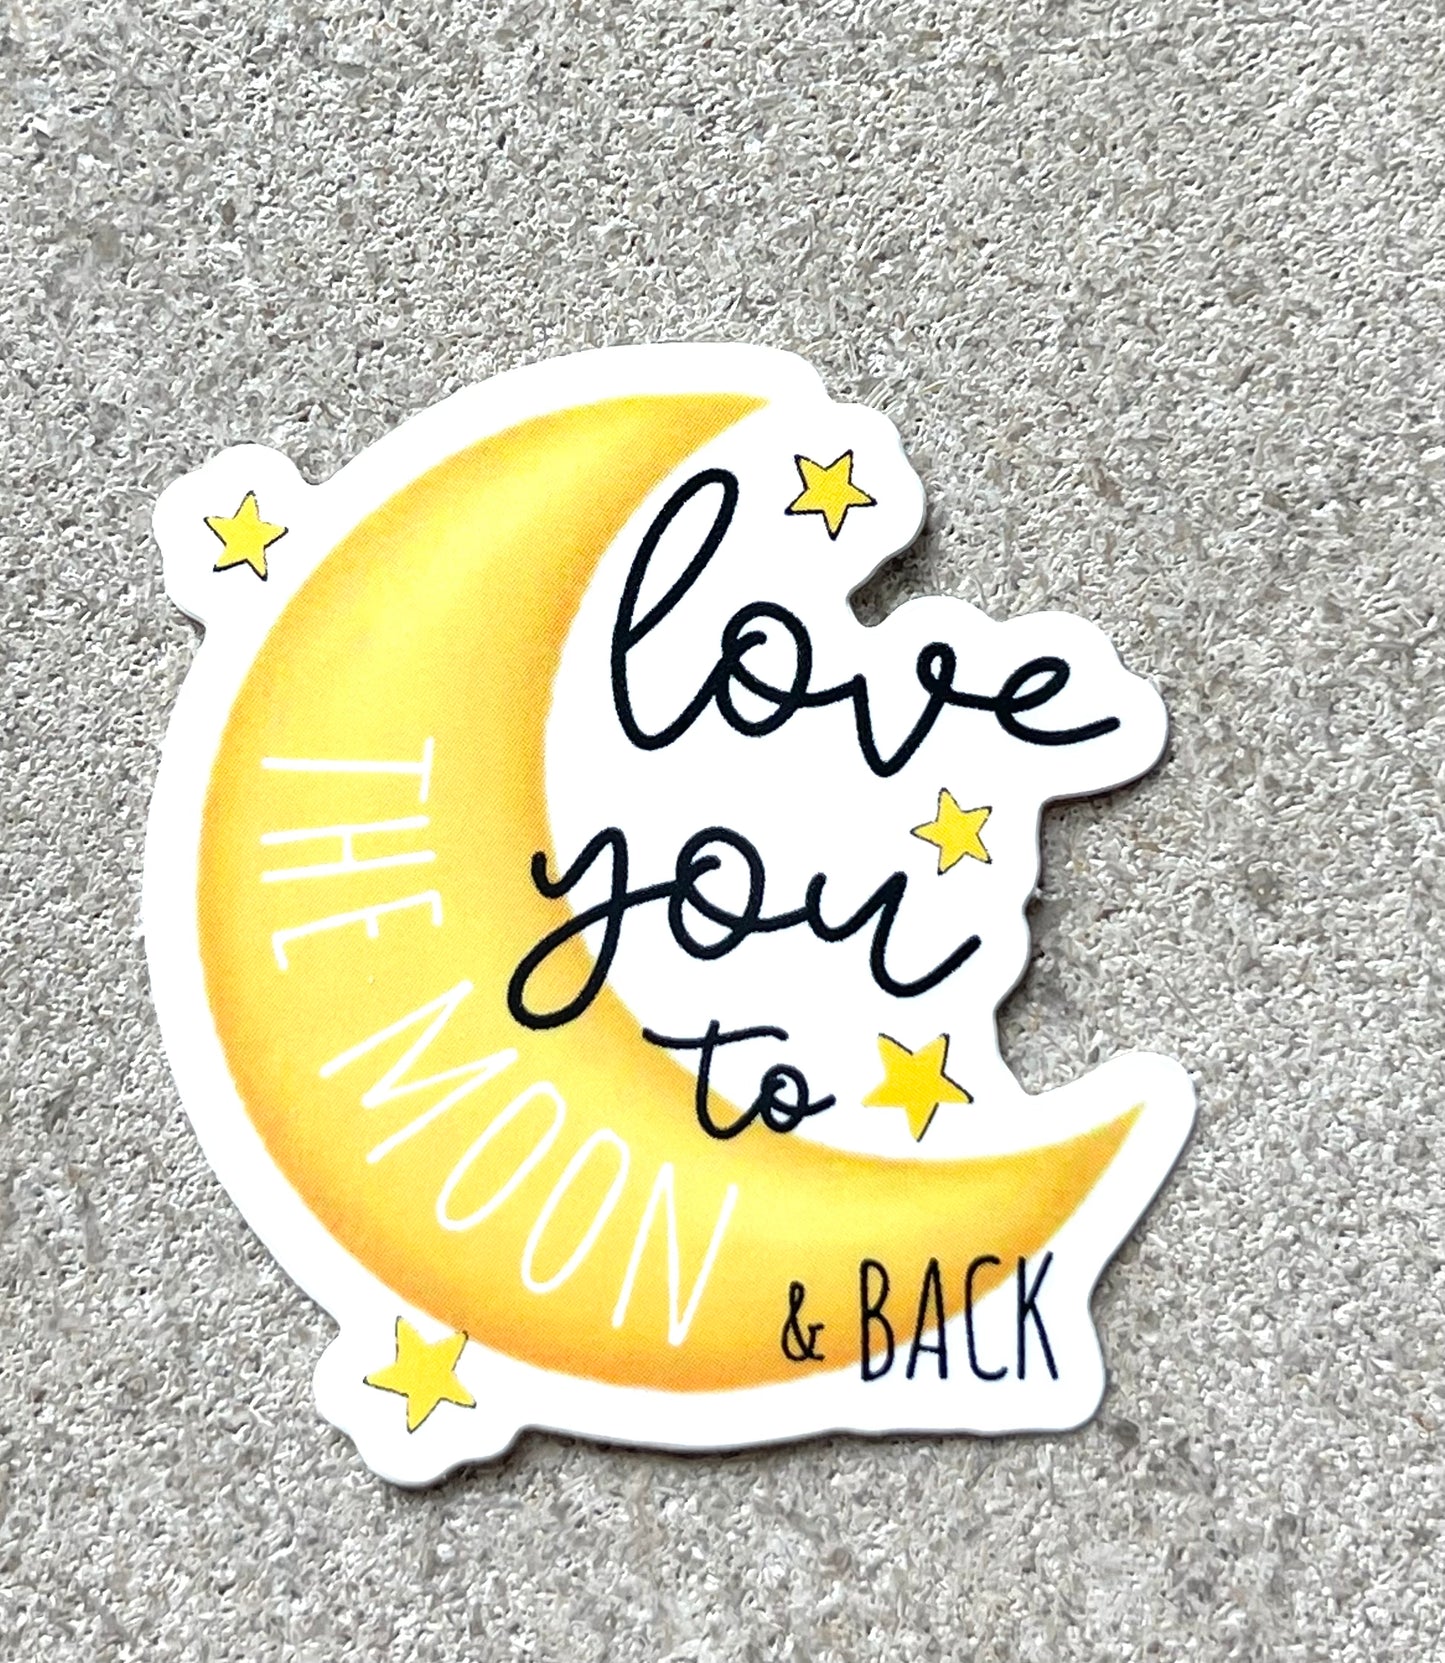 "Love You To The Moon And Back" Sticker